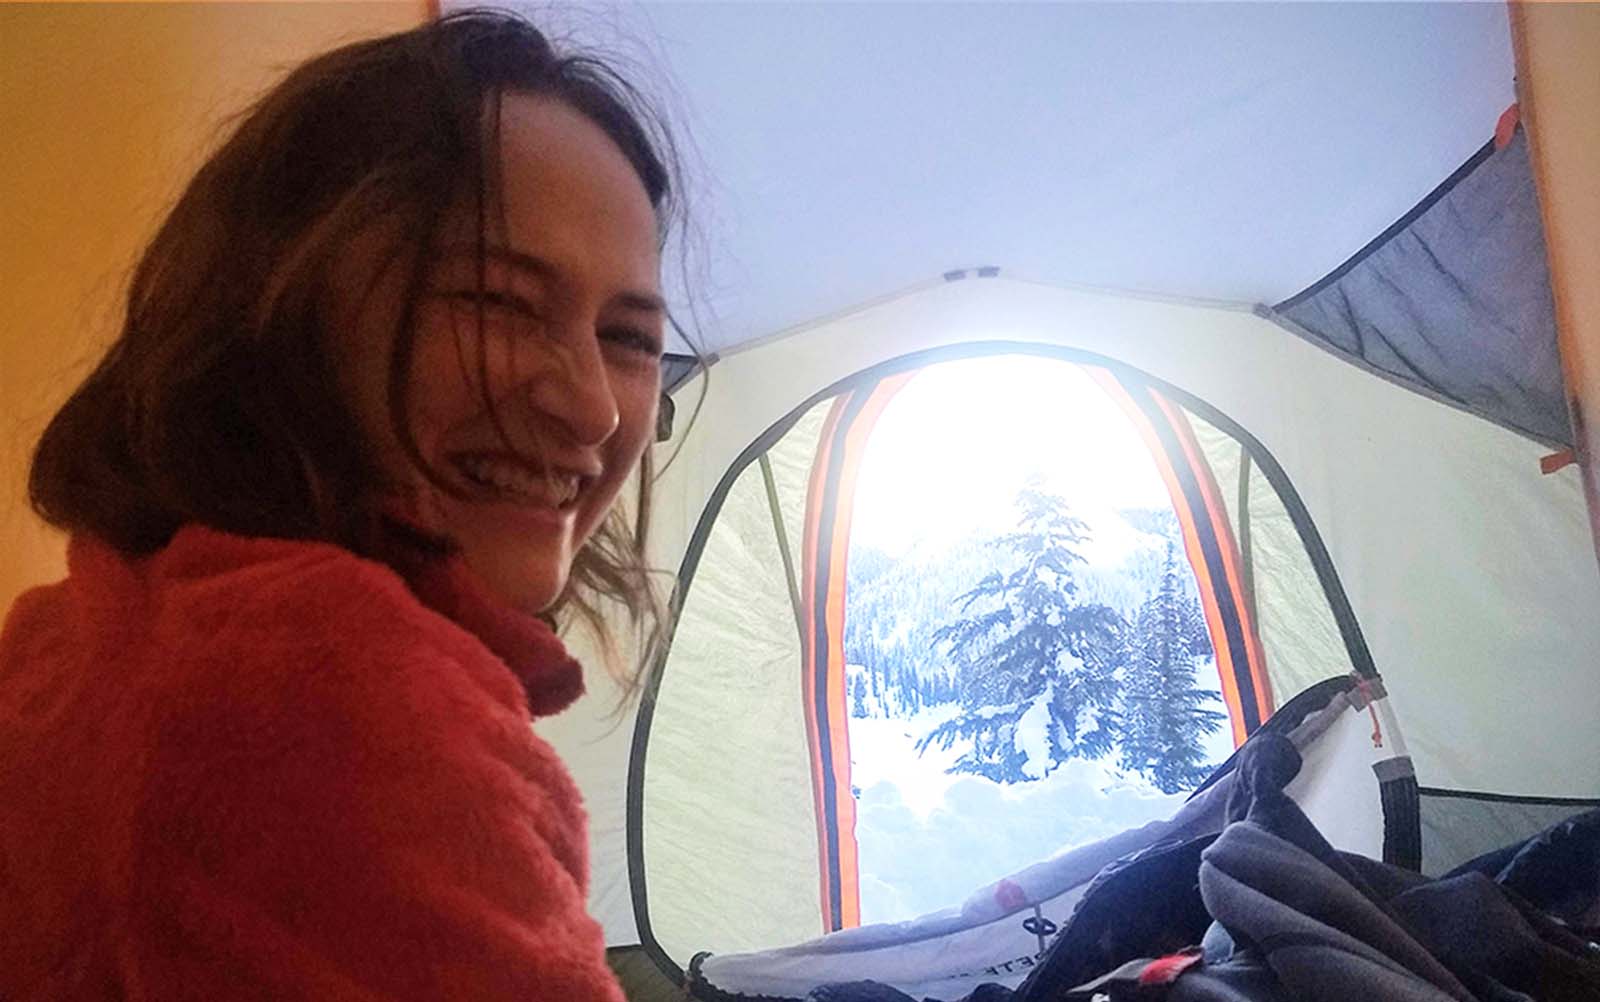 A woman smiling in a tent